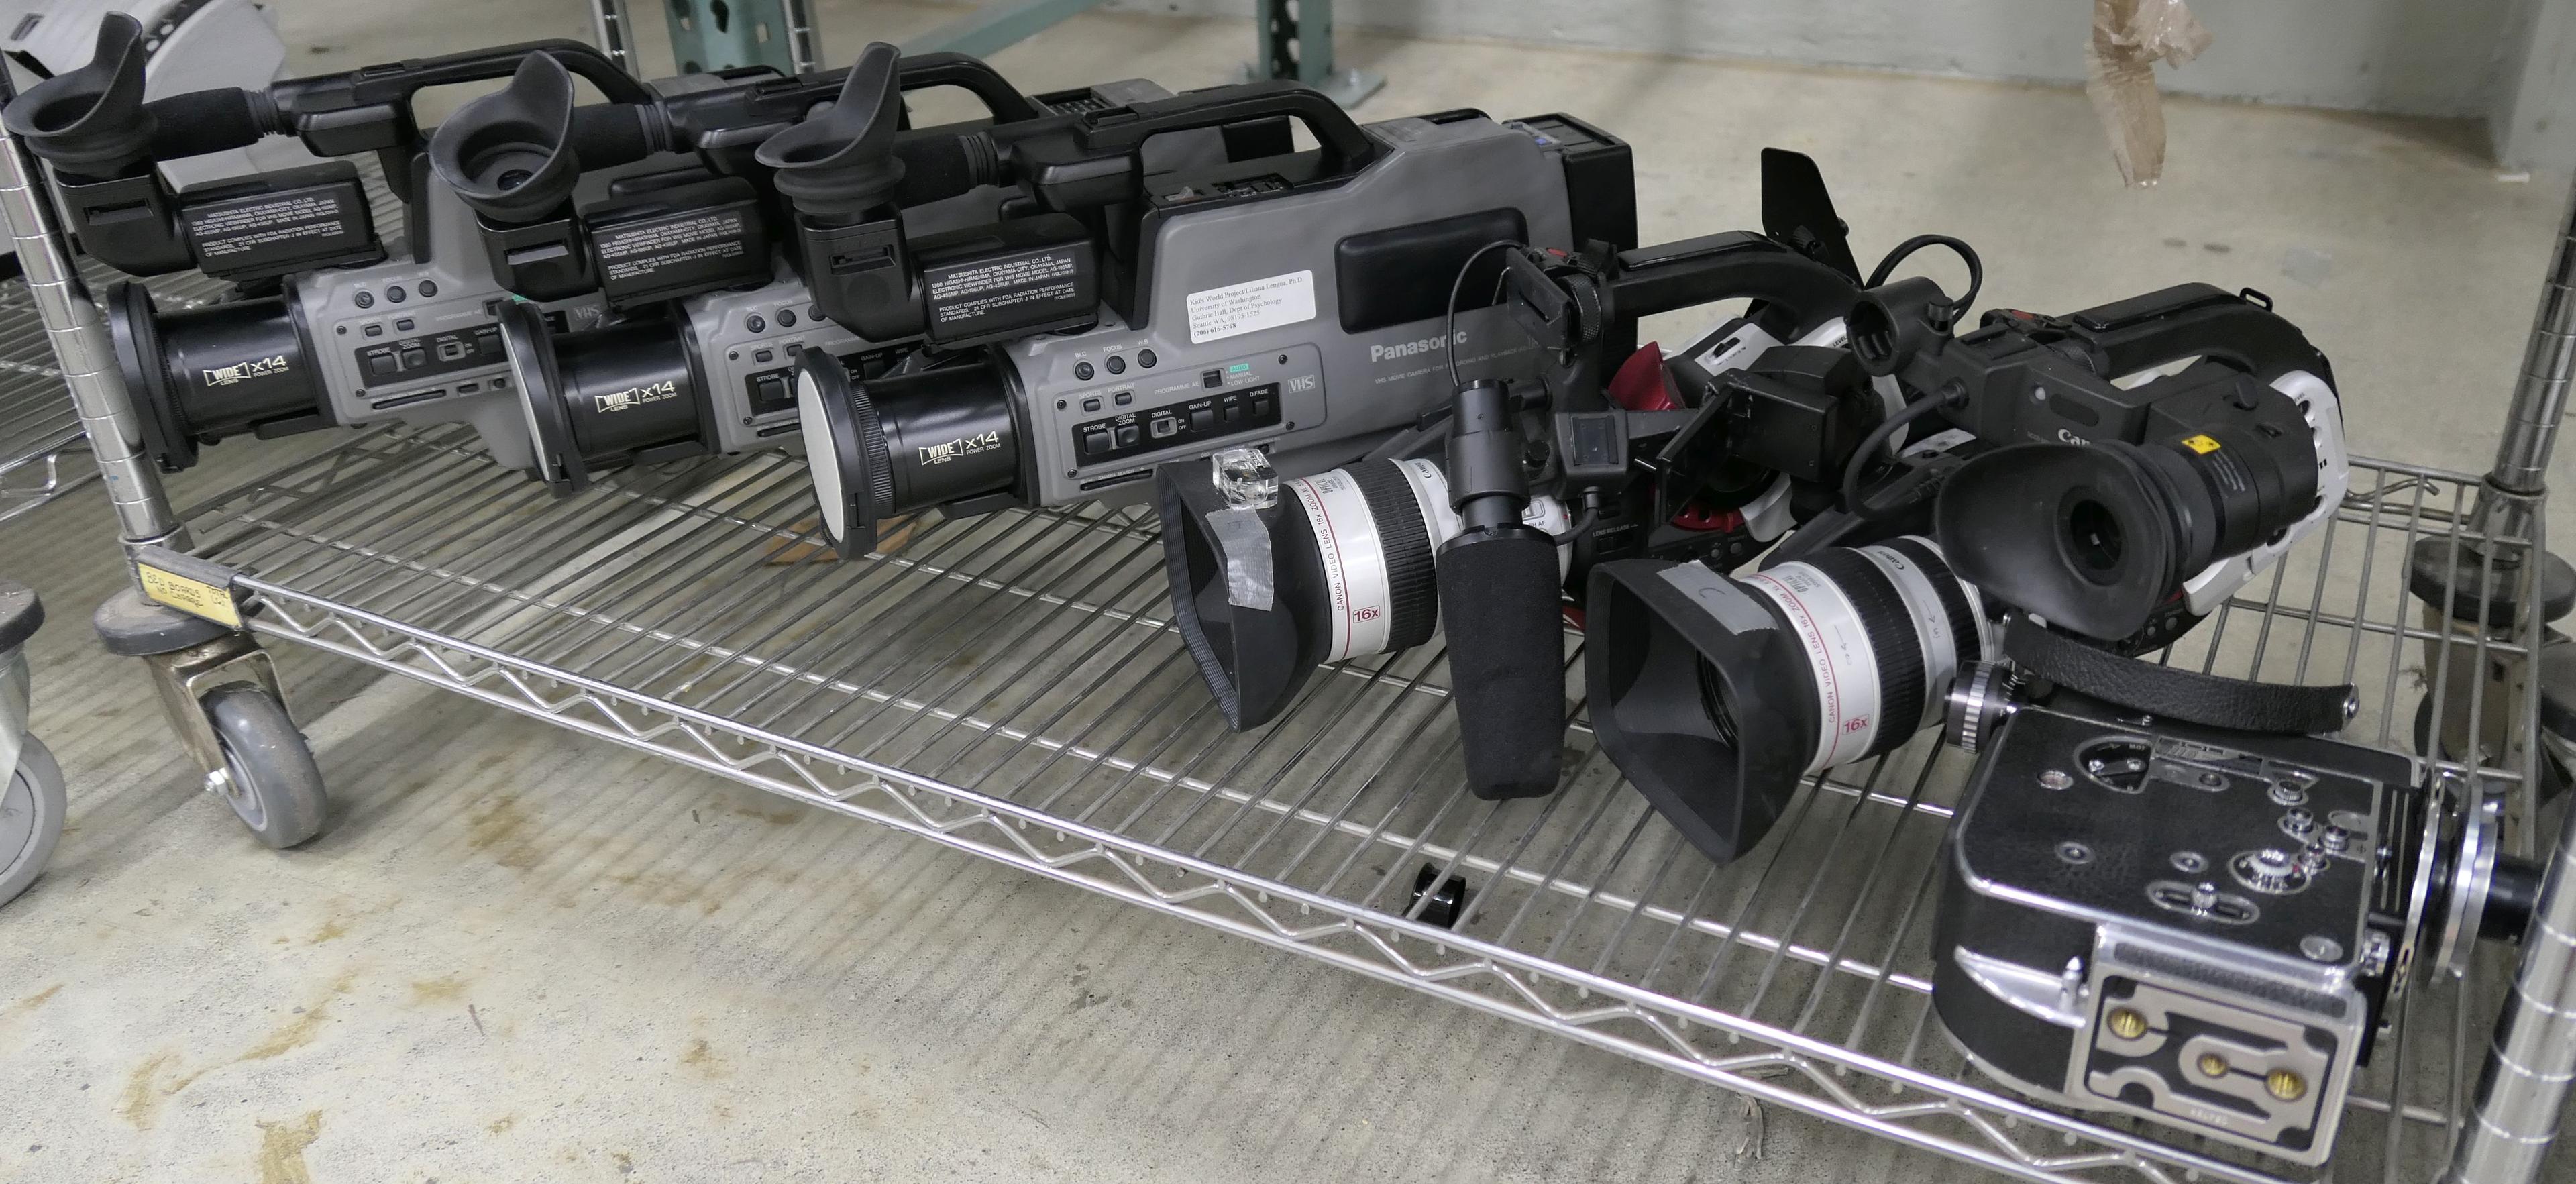 Photography and Video Equipment: Panasonic, Canon, Olympus, & Other, Items on Cart